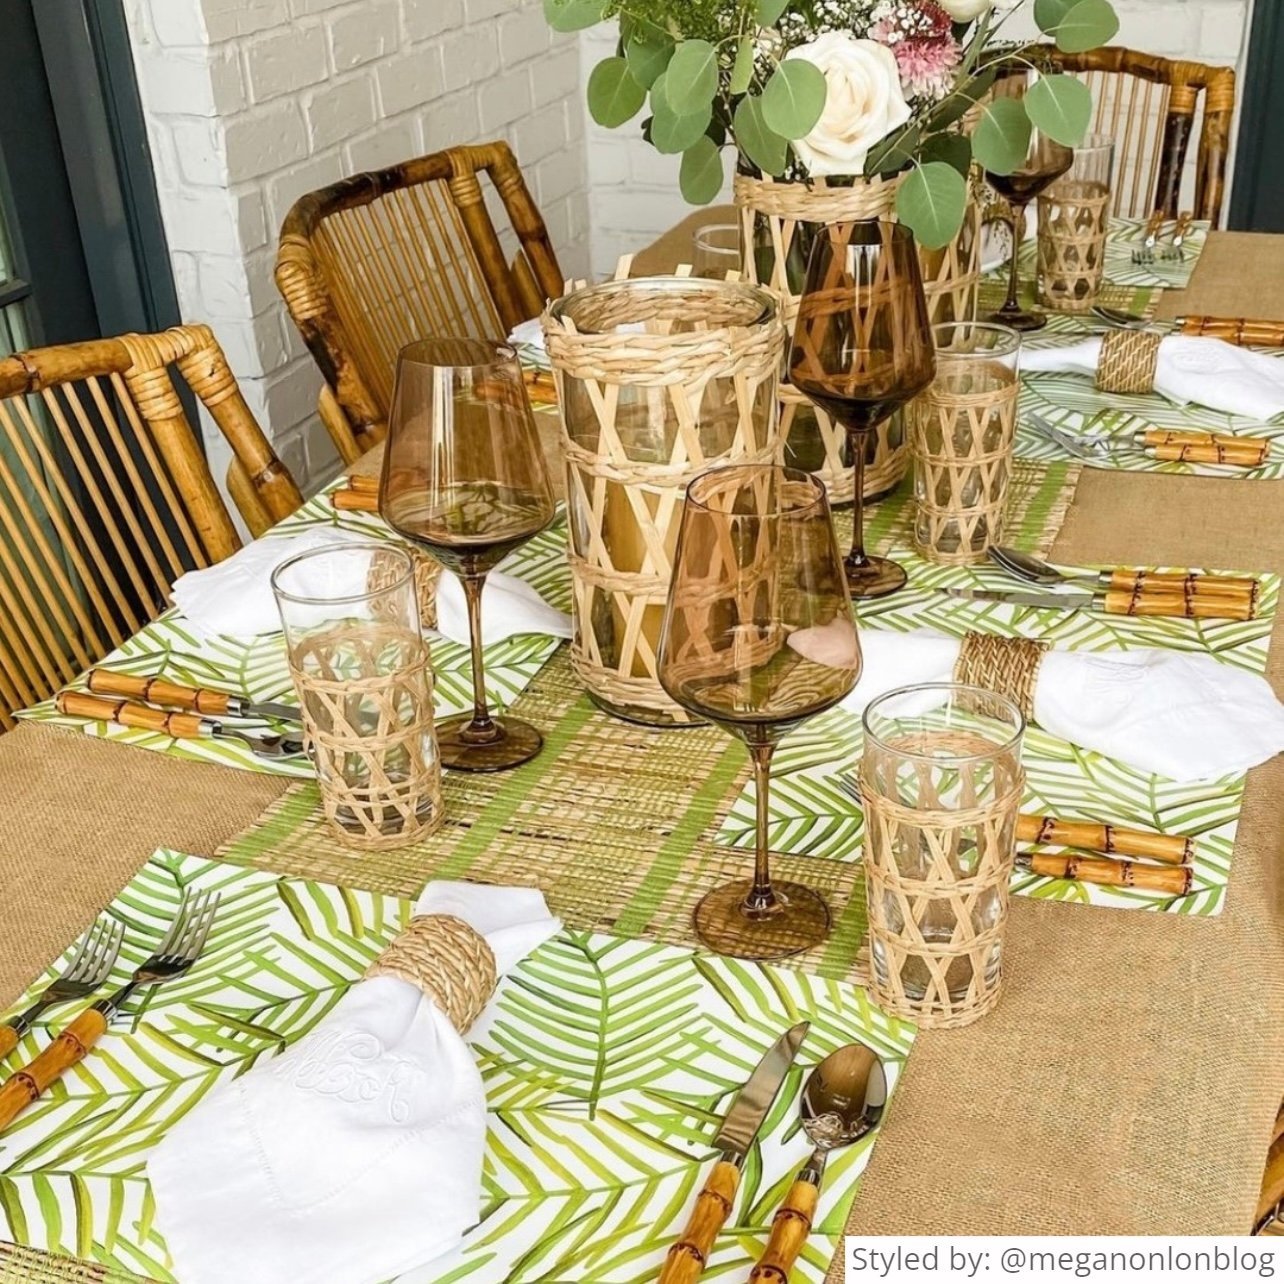 Table set with green palm leaf placemats and bamboo accessories